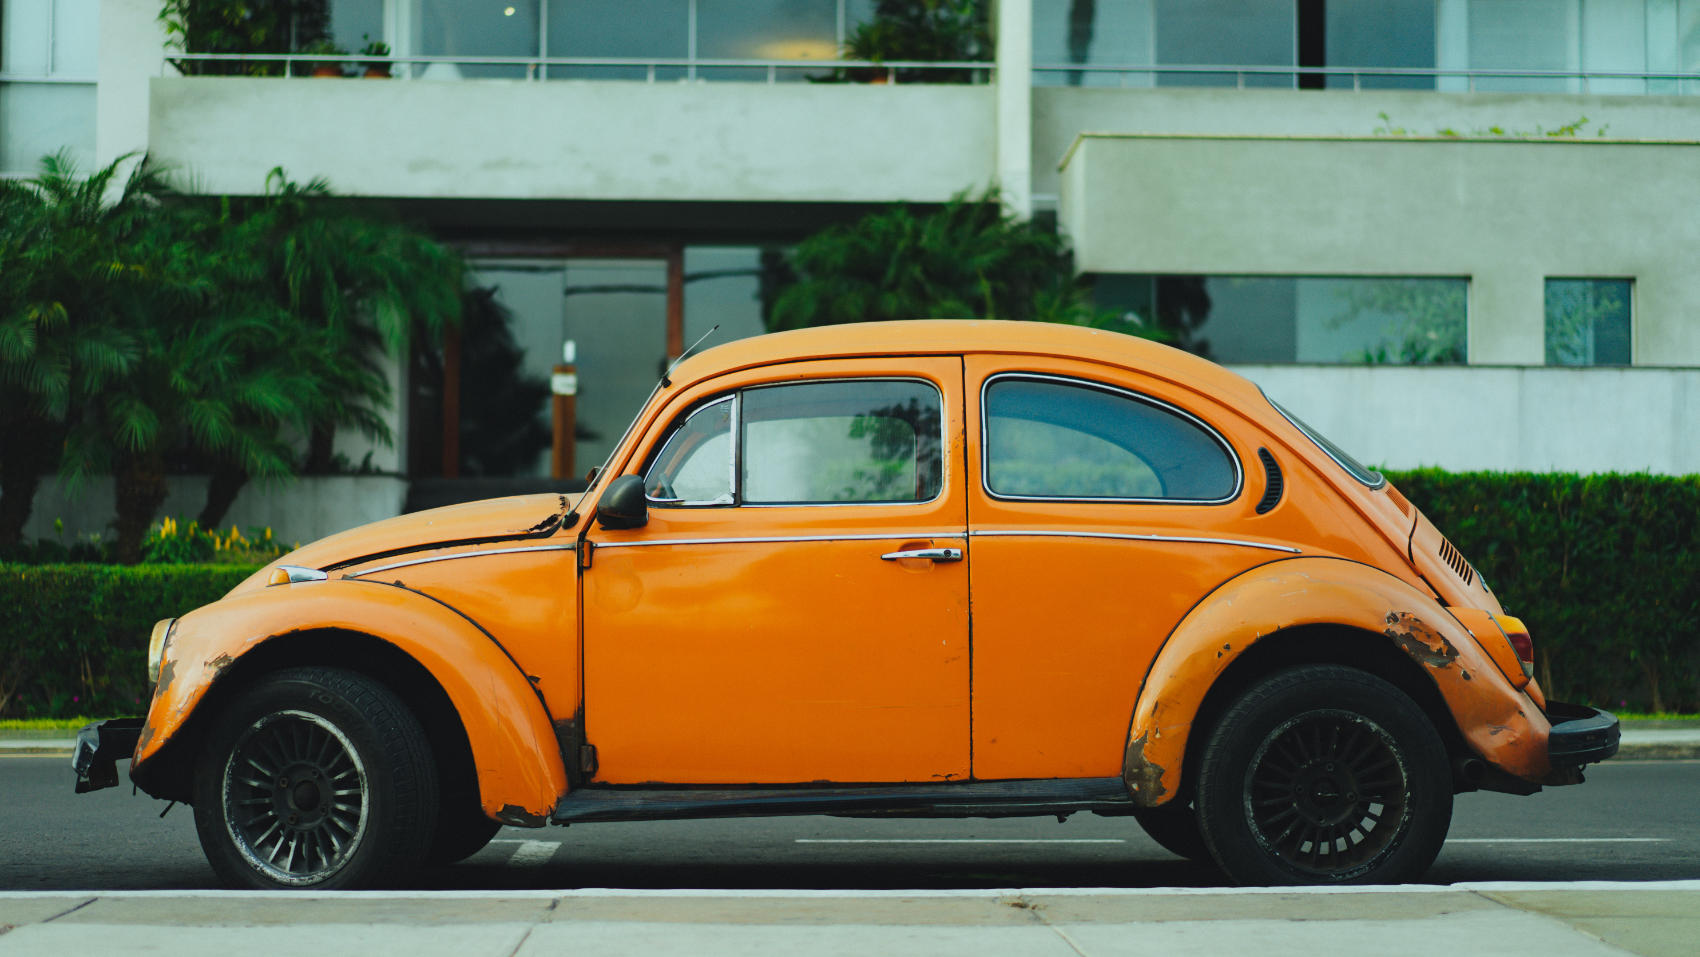 The Volkswagen Beetle: A Classic Car Icon and Its Evolution Over